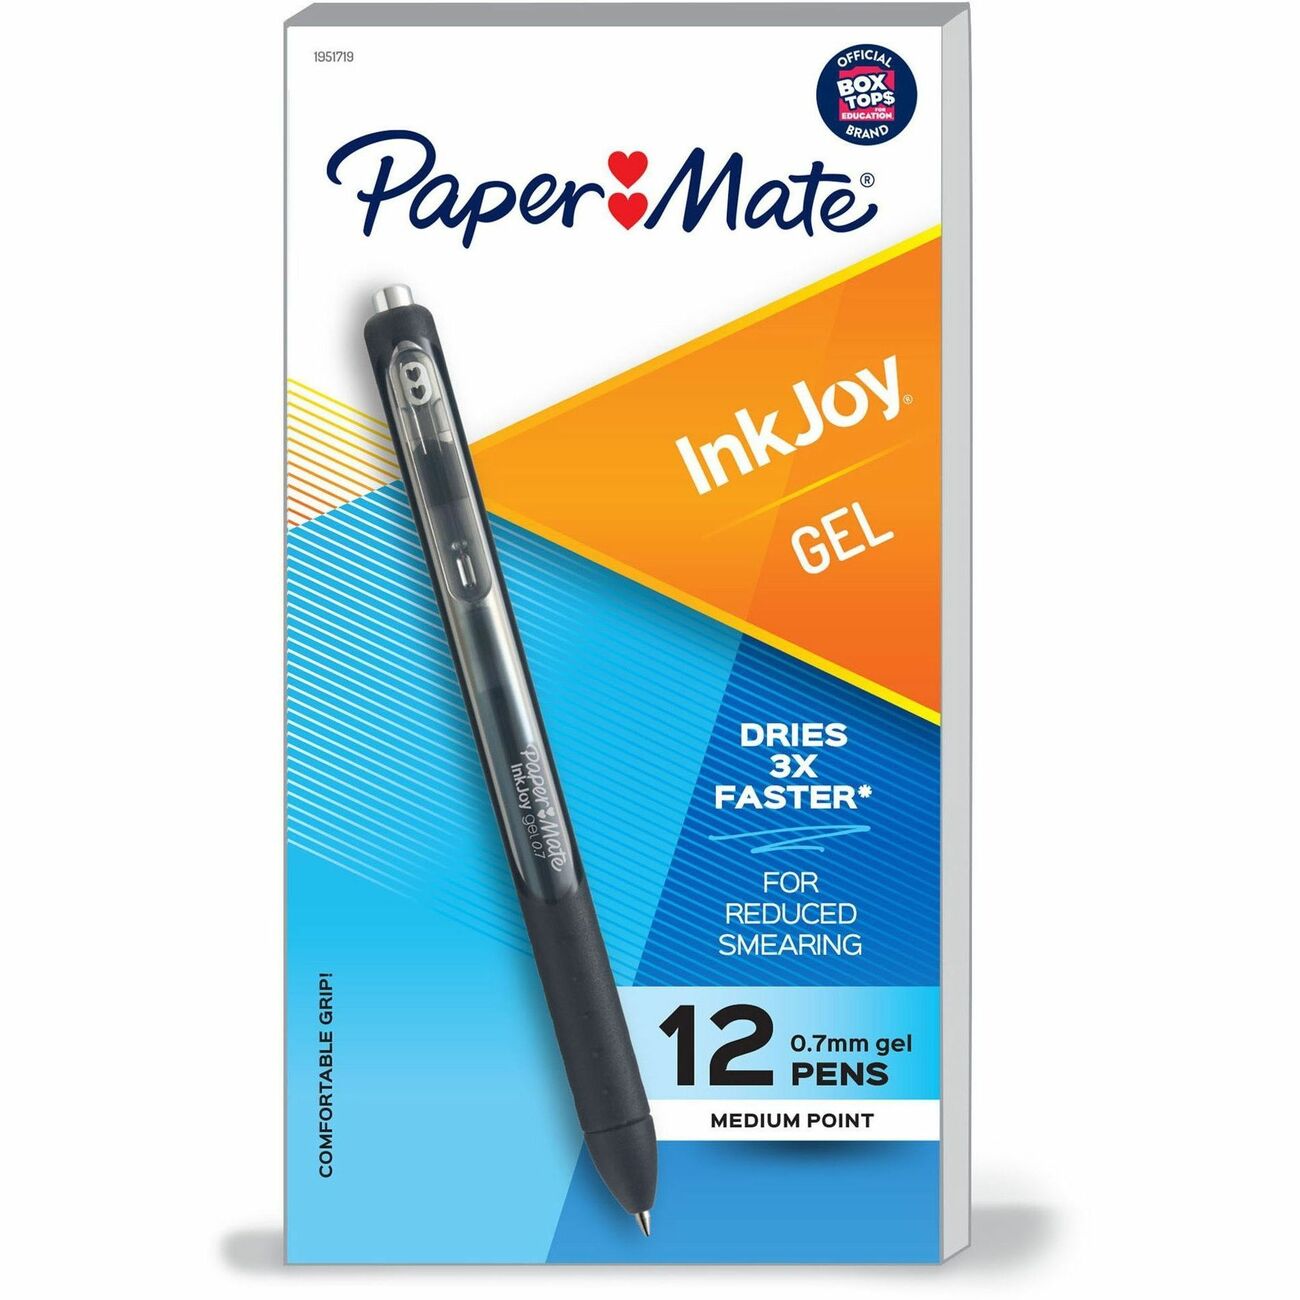 From The Archives: PaperMate Inkjoy 0.7mm 14-Color Set - The Well